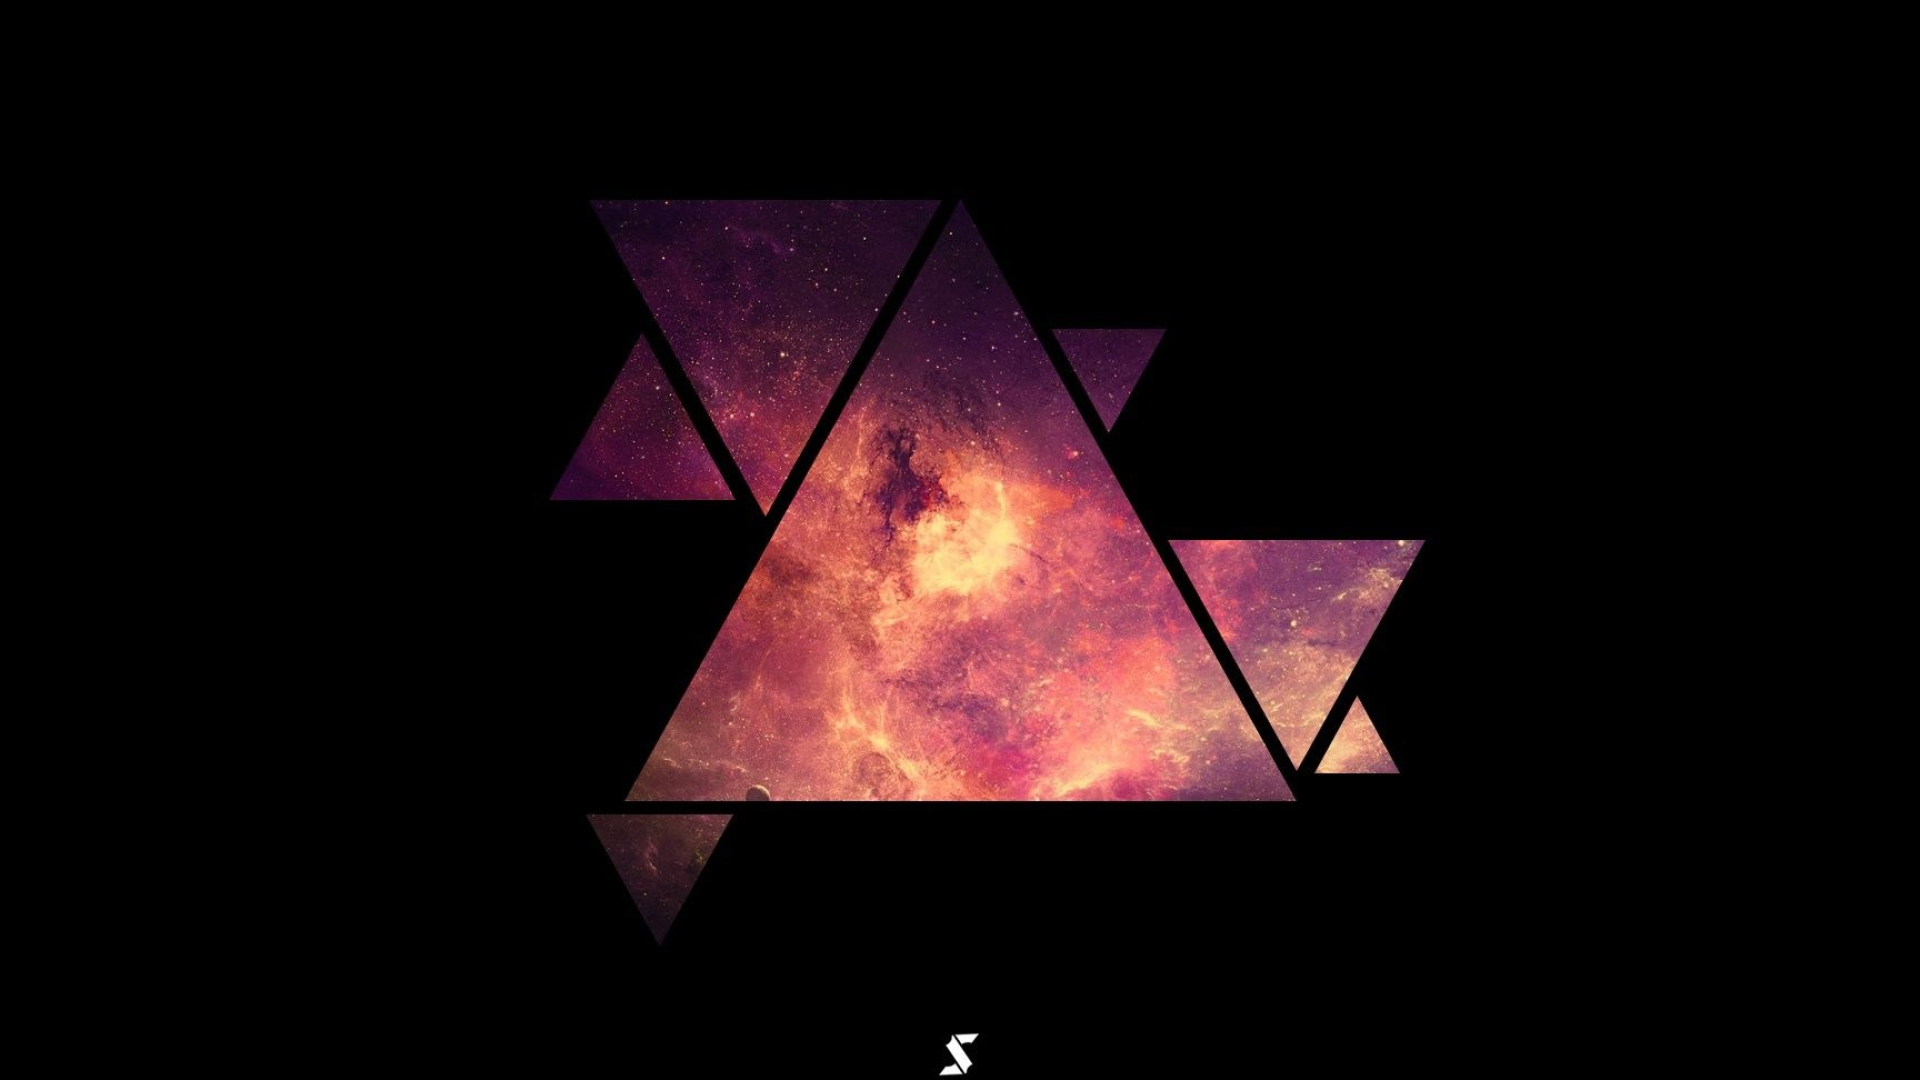 Hipster element, Galaxy within triangle, Cosmic vibes, Geometric illusions, Artistic concept, 1920x1080 Full HD Desktop